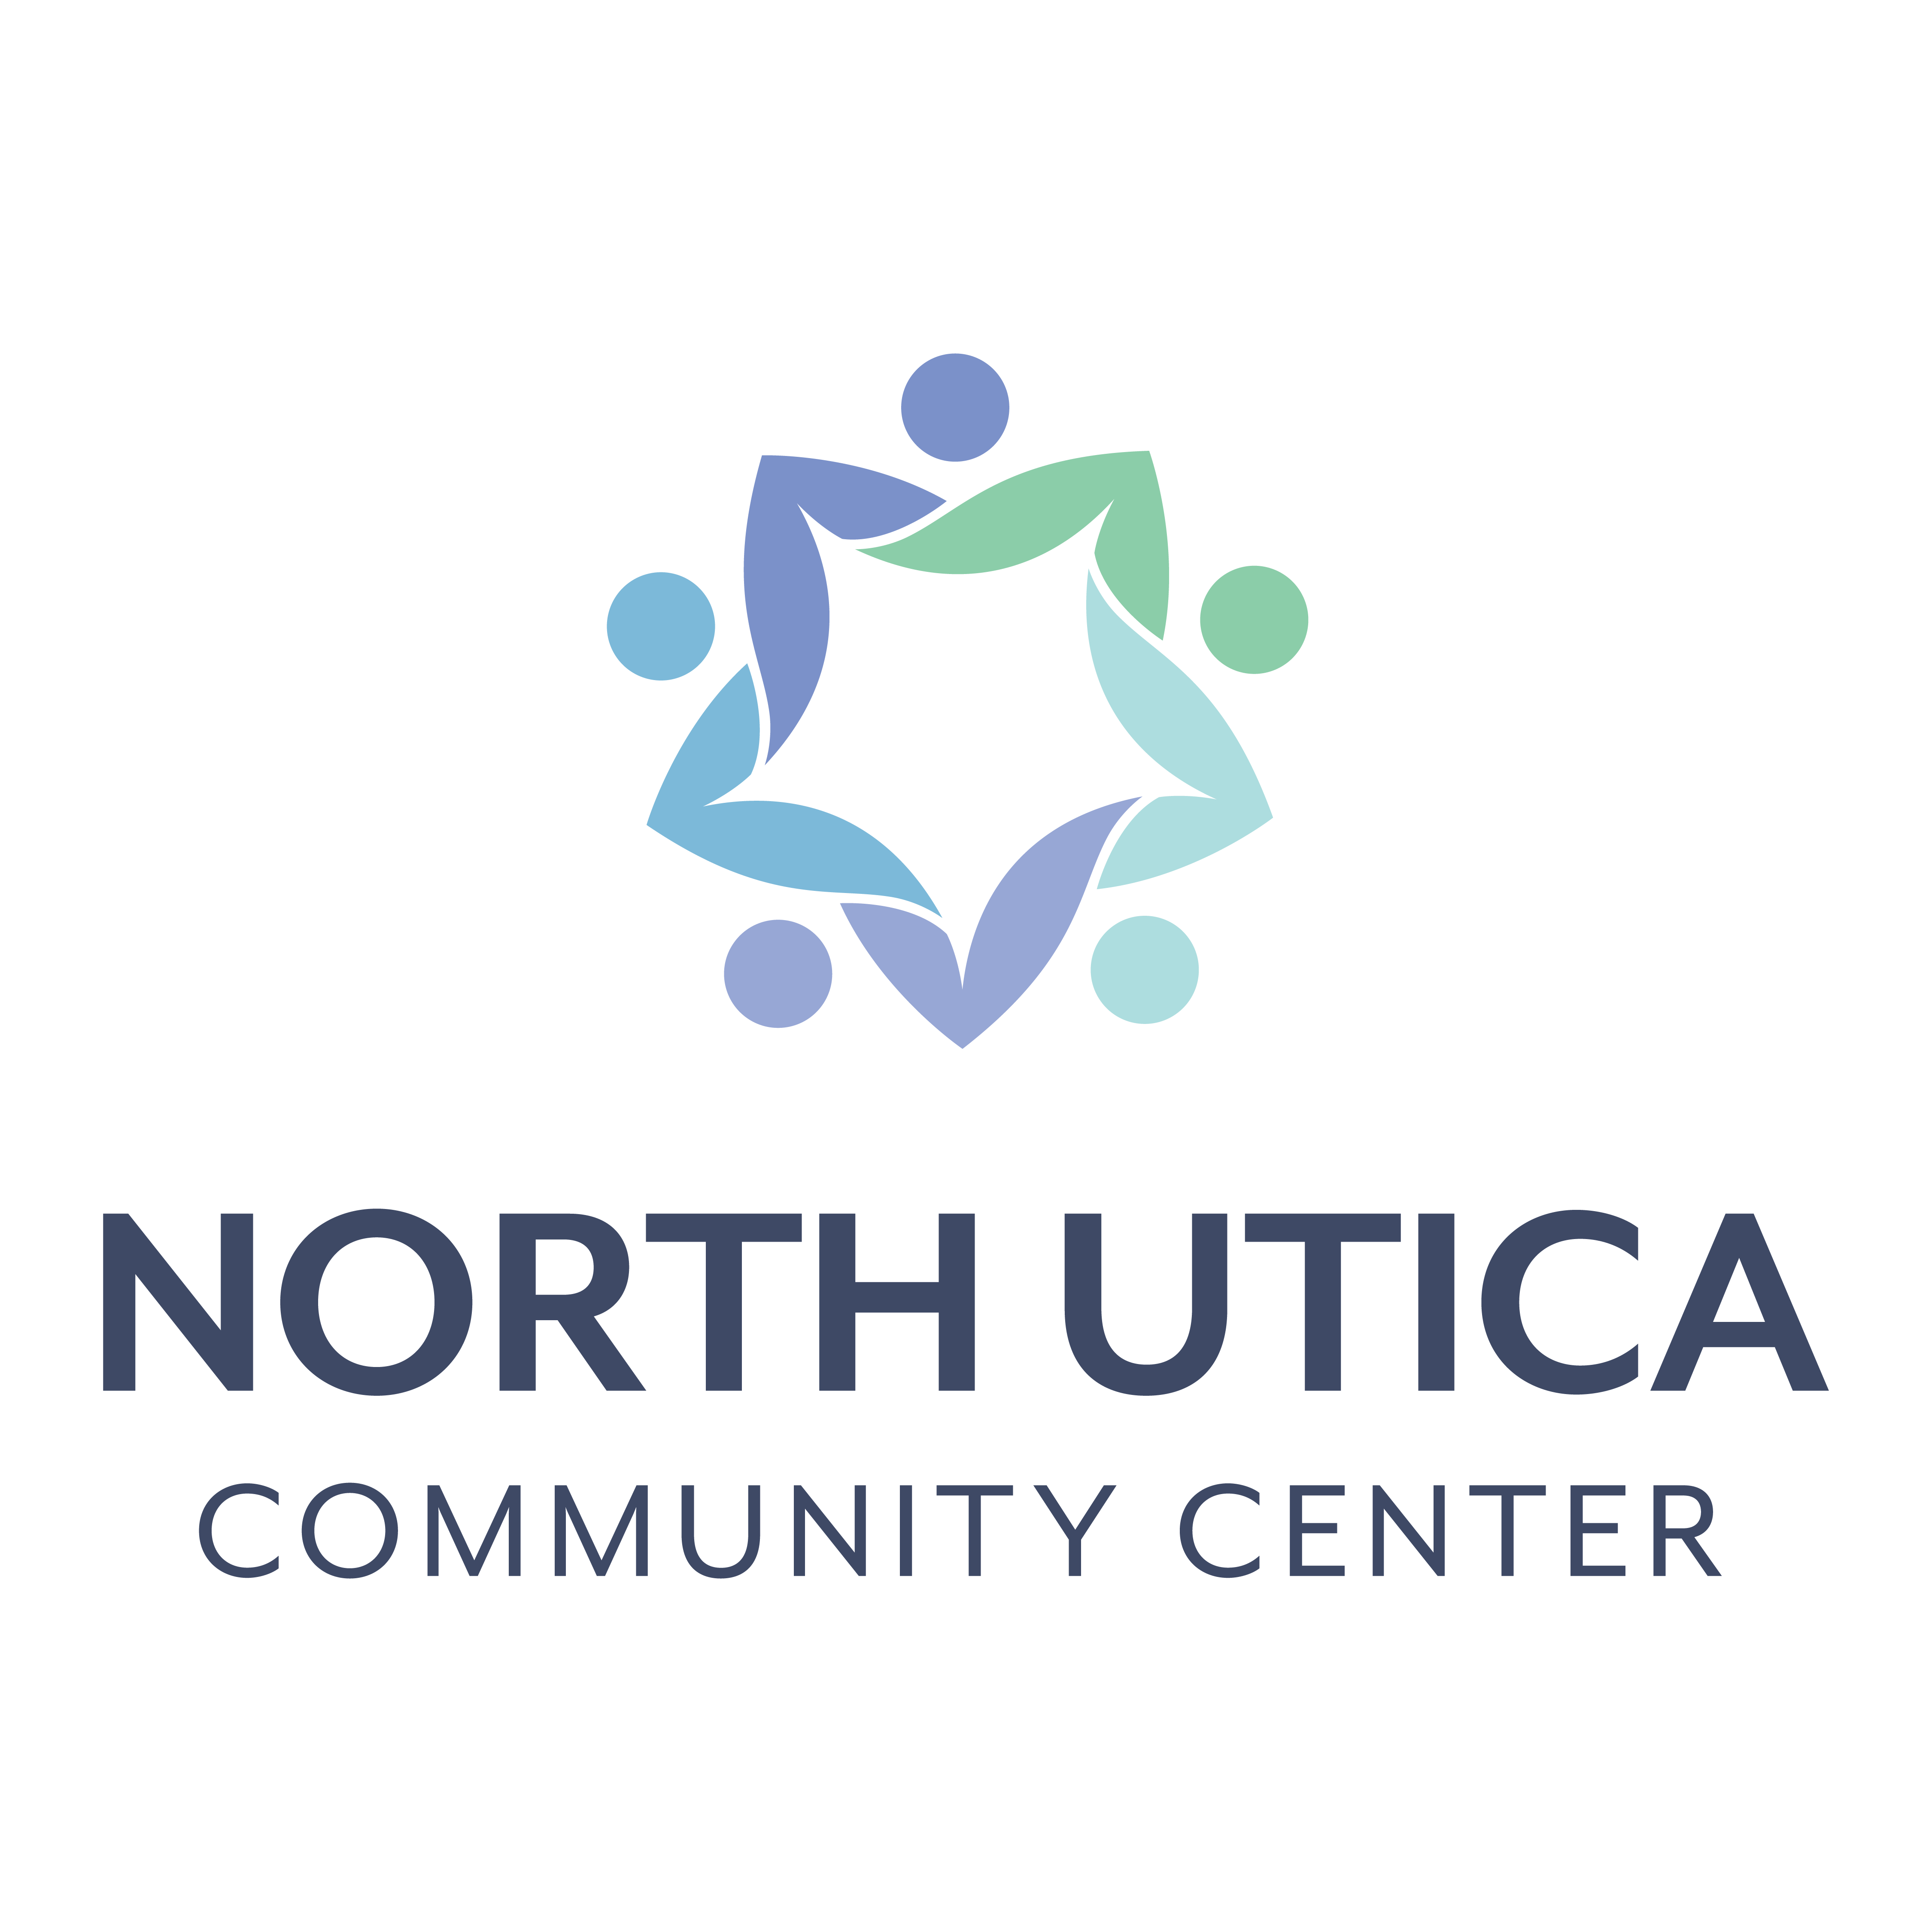 Fall Craft Fair planned at North Utica Community Center Saturday, October 14th background image